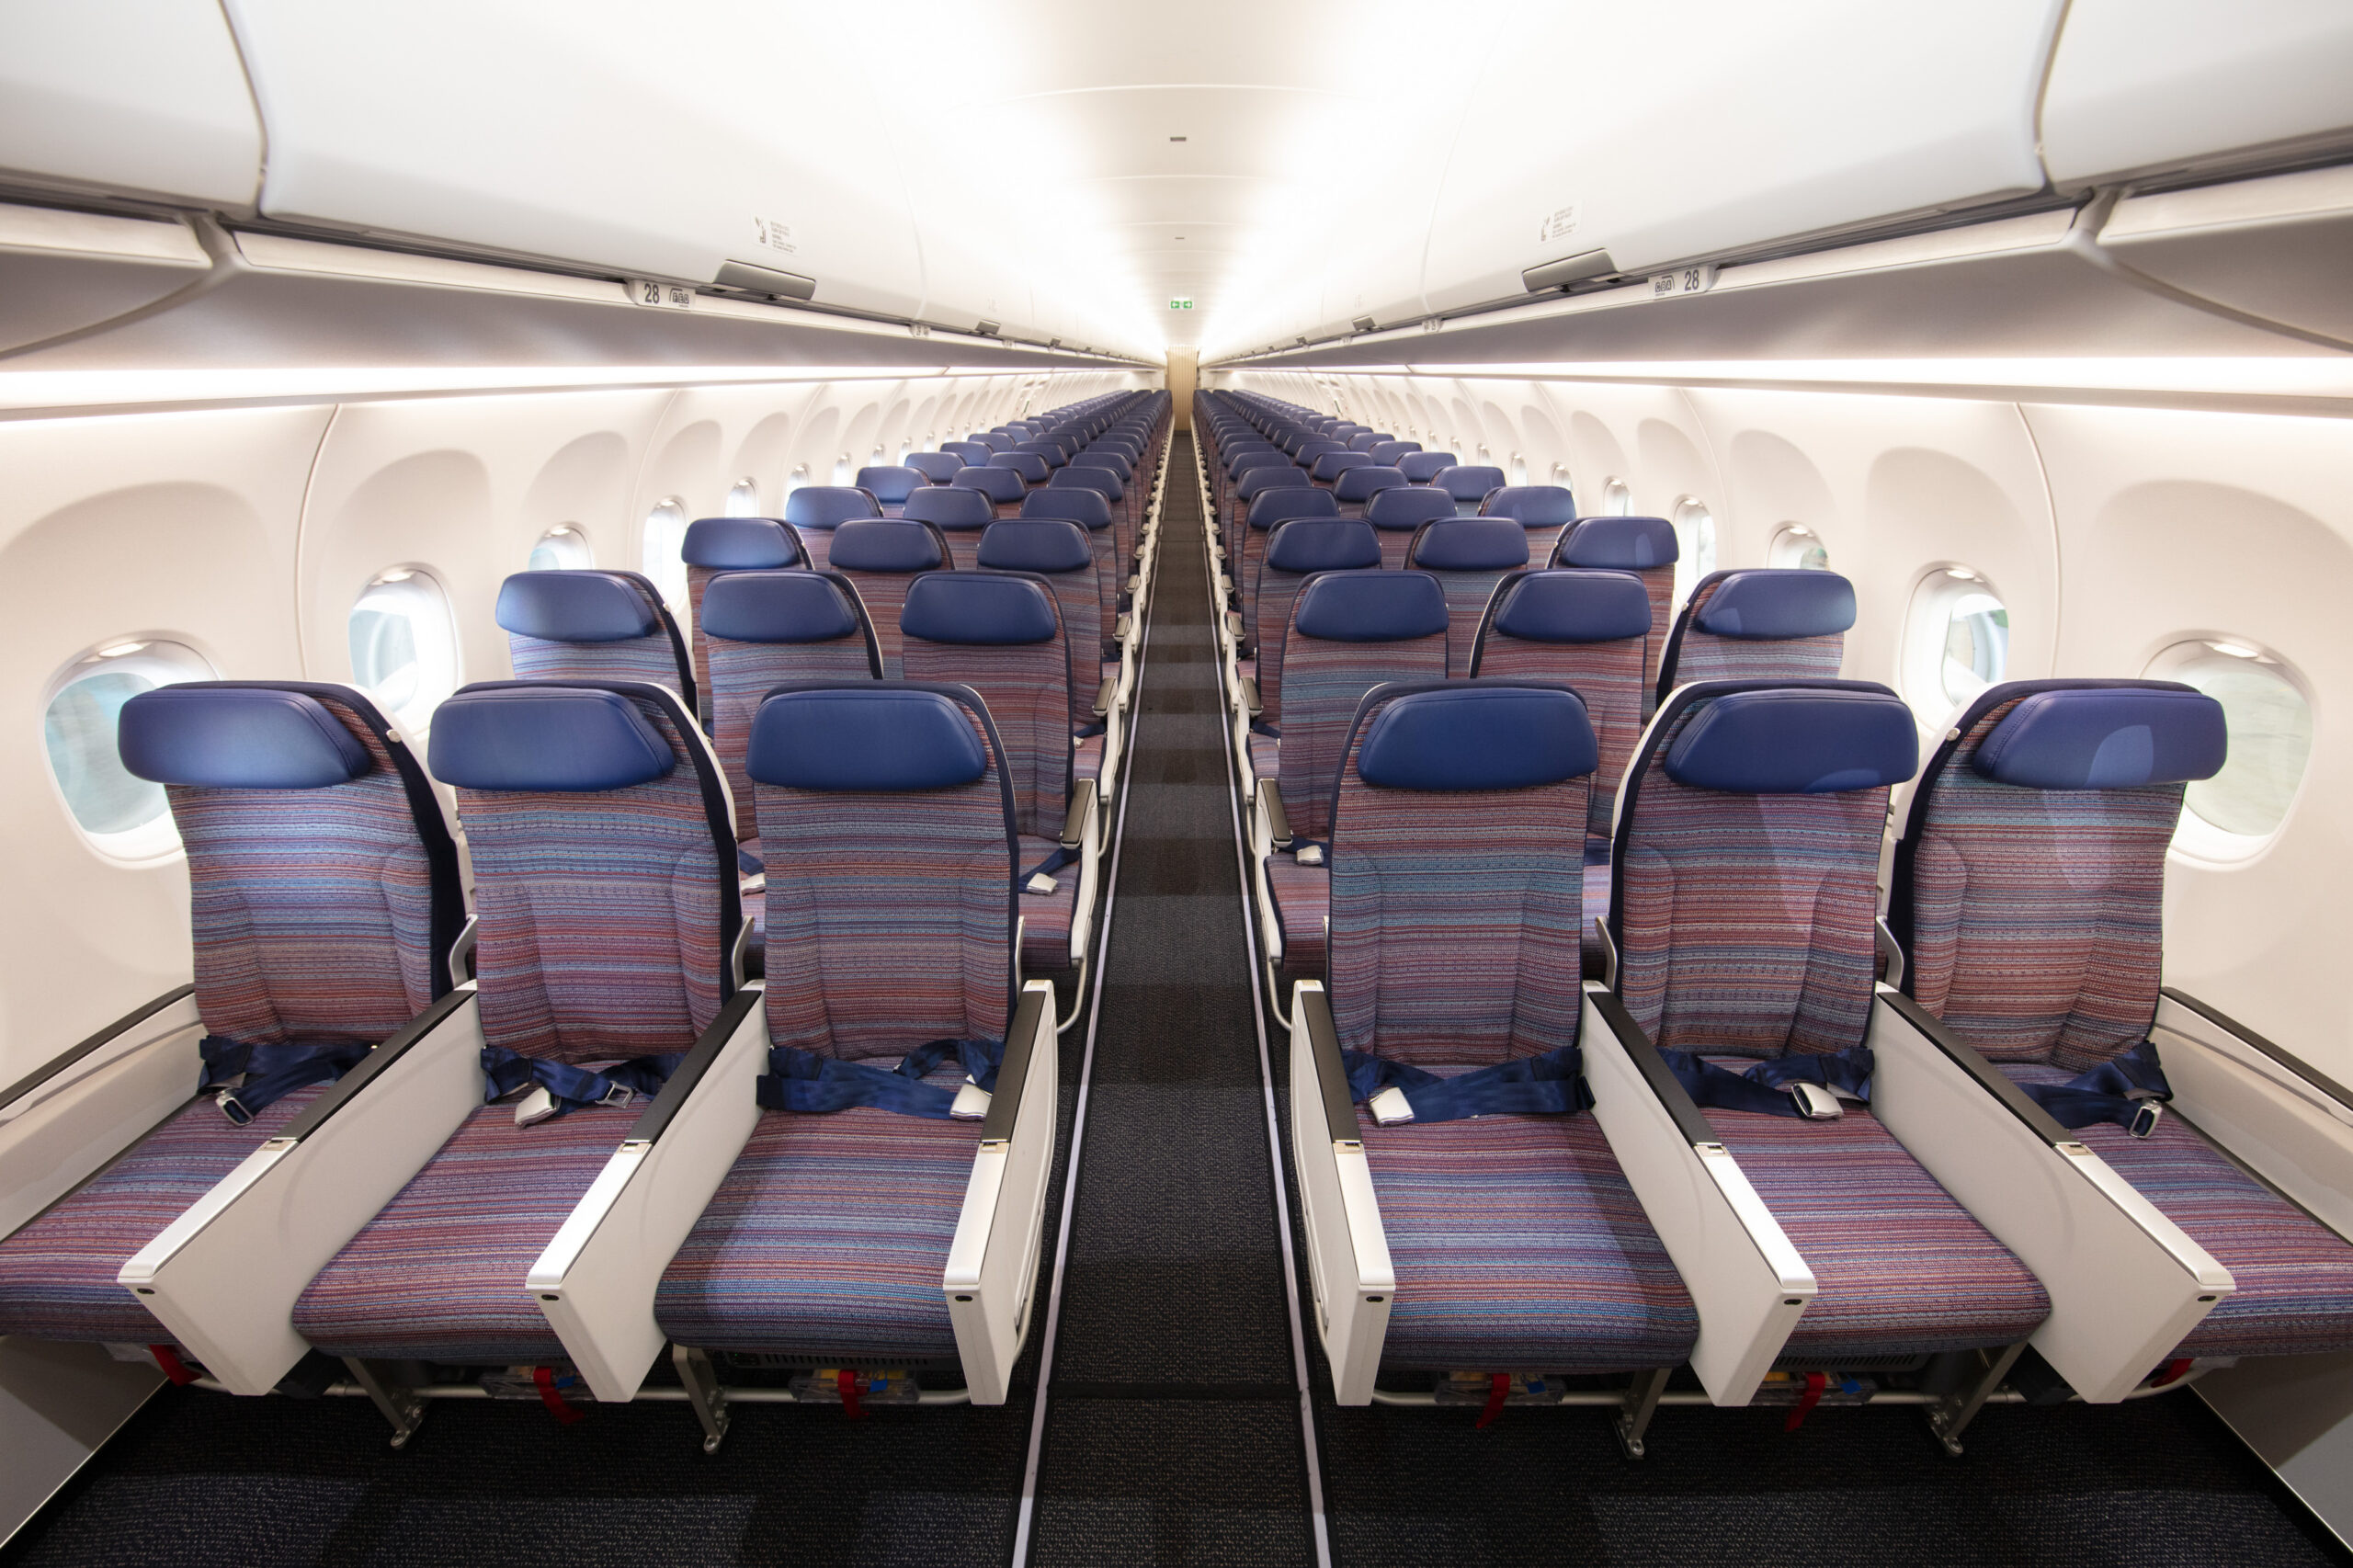 Which Airlines Offer The Best Economy Seats In Narrowbody Aircraft